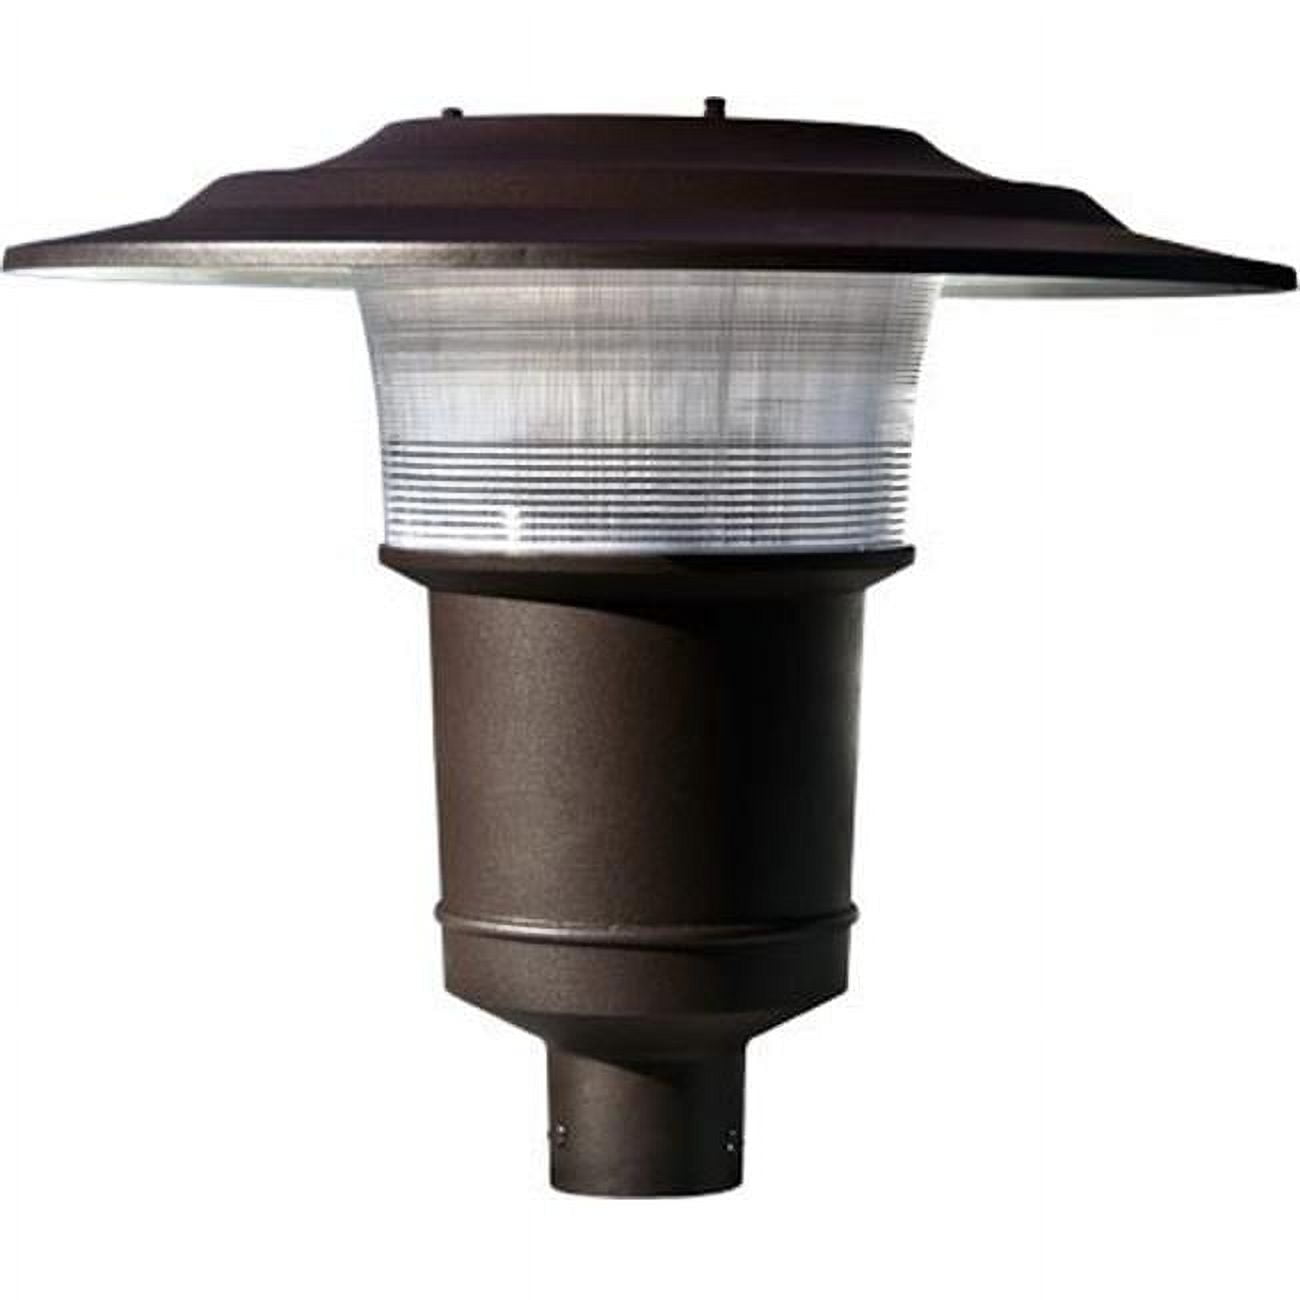 Picture of Dabmar Lighting GM650-BZ-MT Powder Coated Cast Aluminum Architectural Post Top Light Fixture, Bronze - 19.50 x 23.13 x 23.13 in.